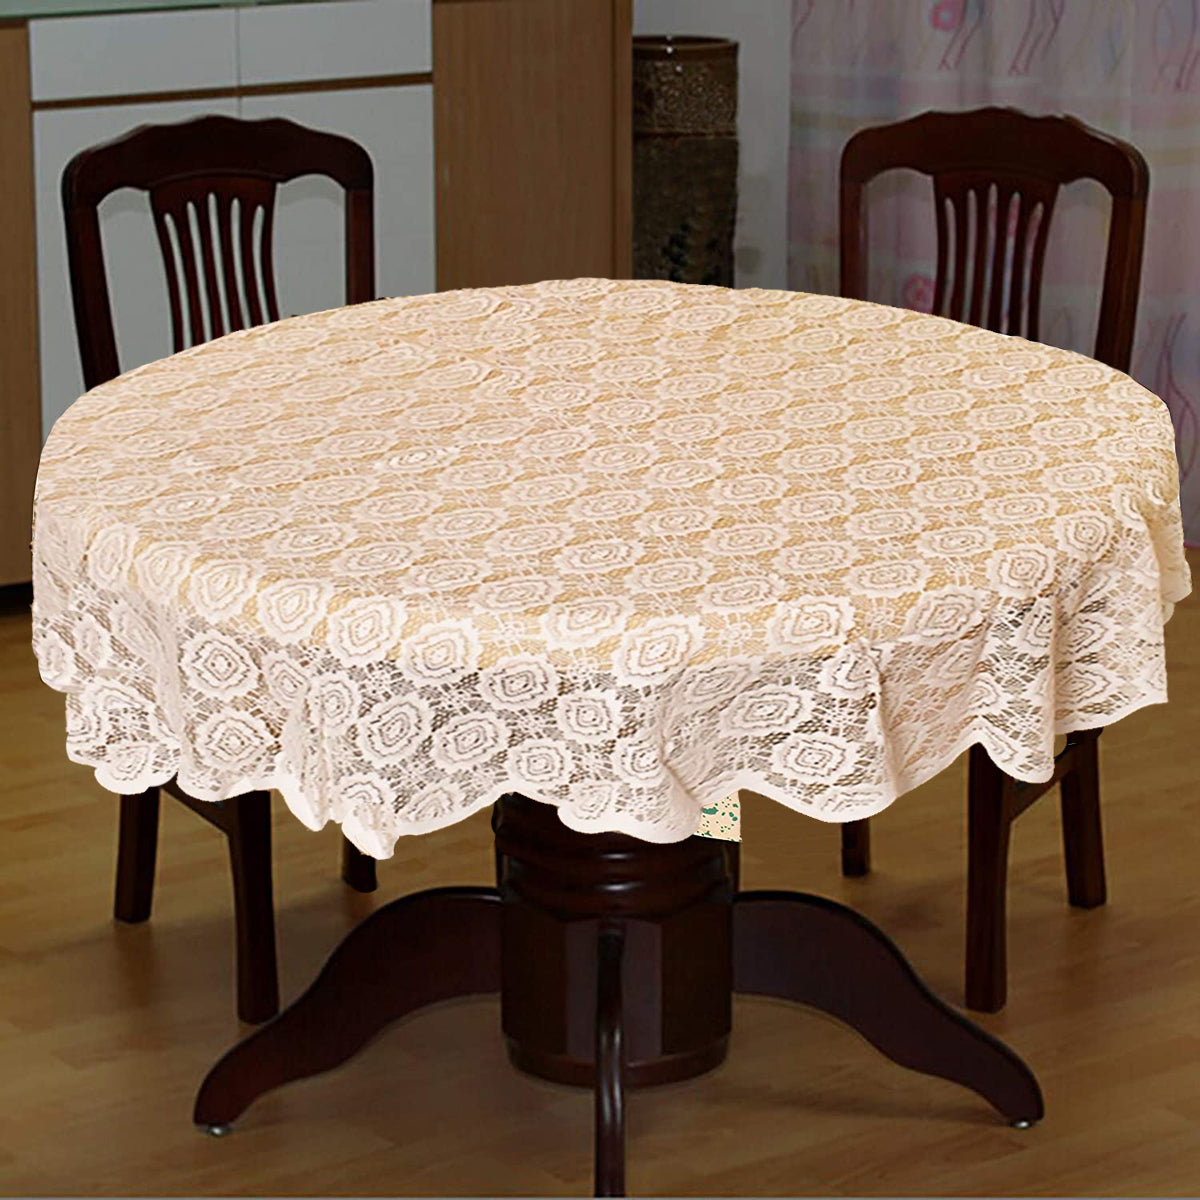 Weavers Villa Floral Cotton Net 4 Seater Round Table Cover [White, 56 x 56 Inches]